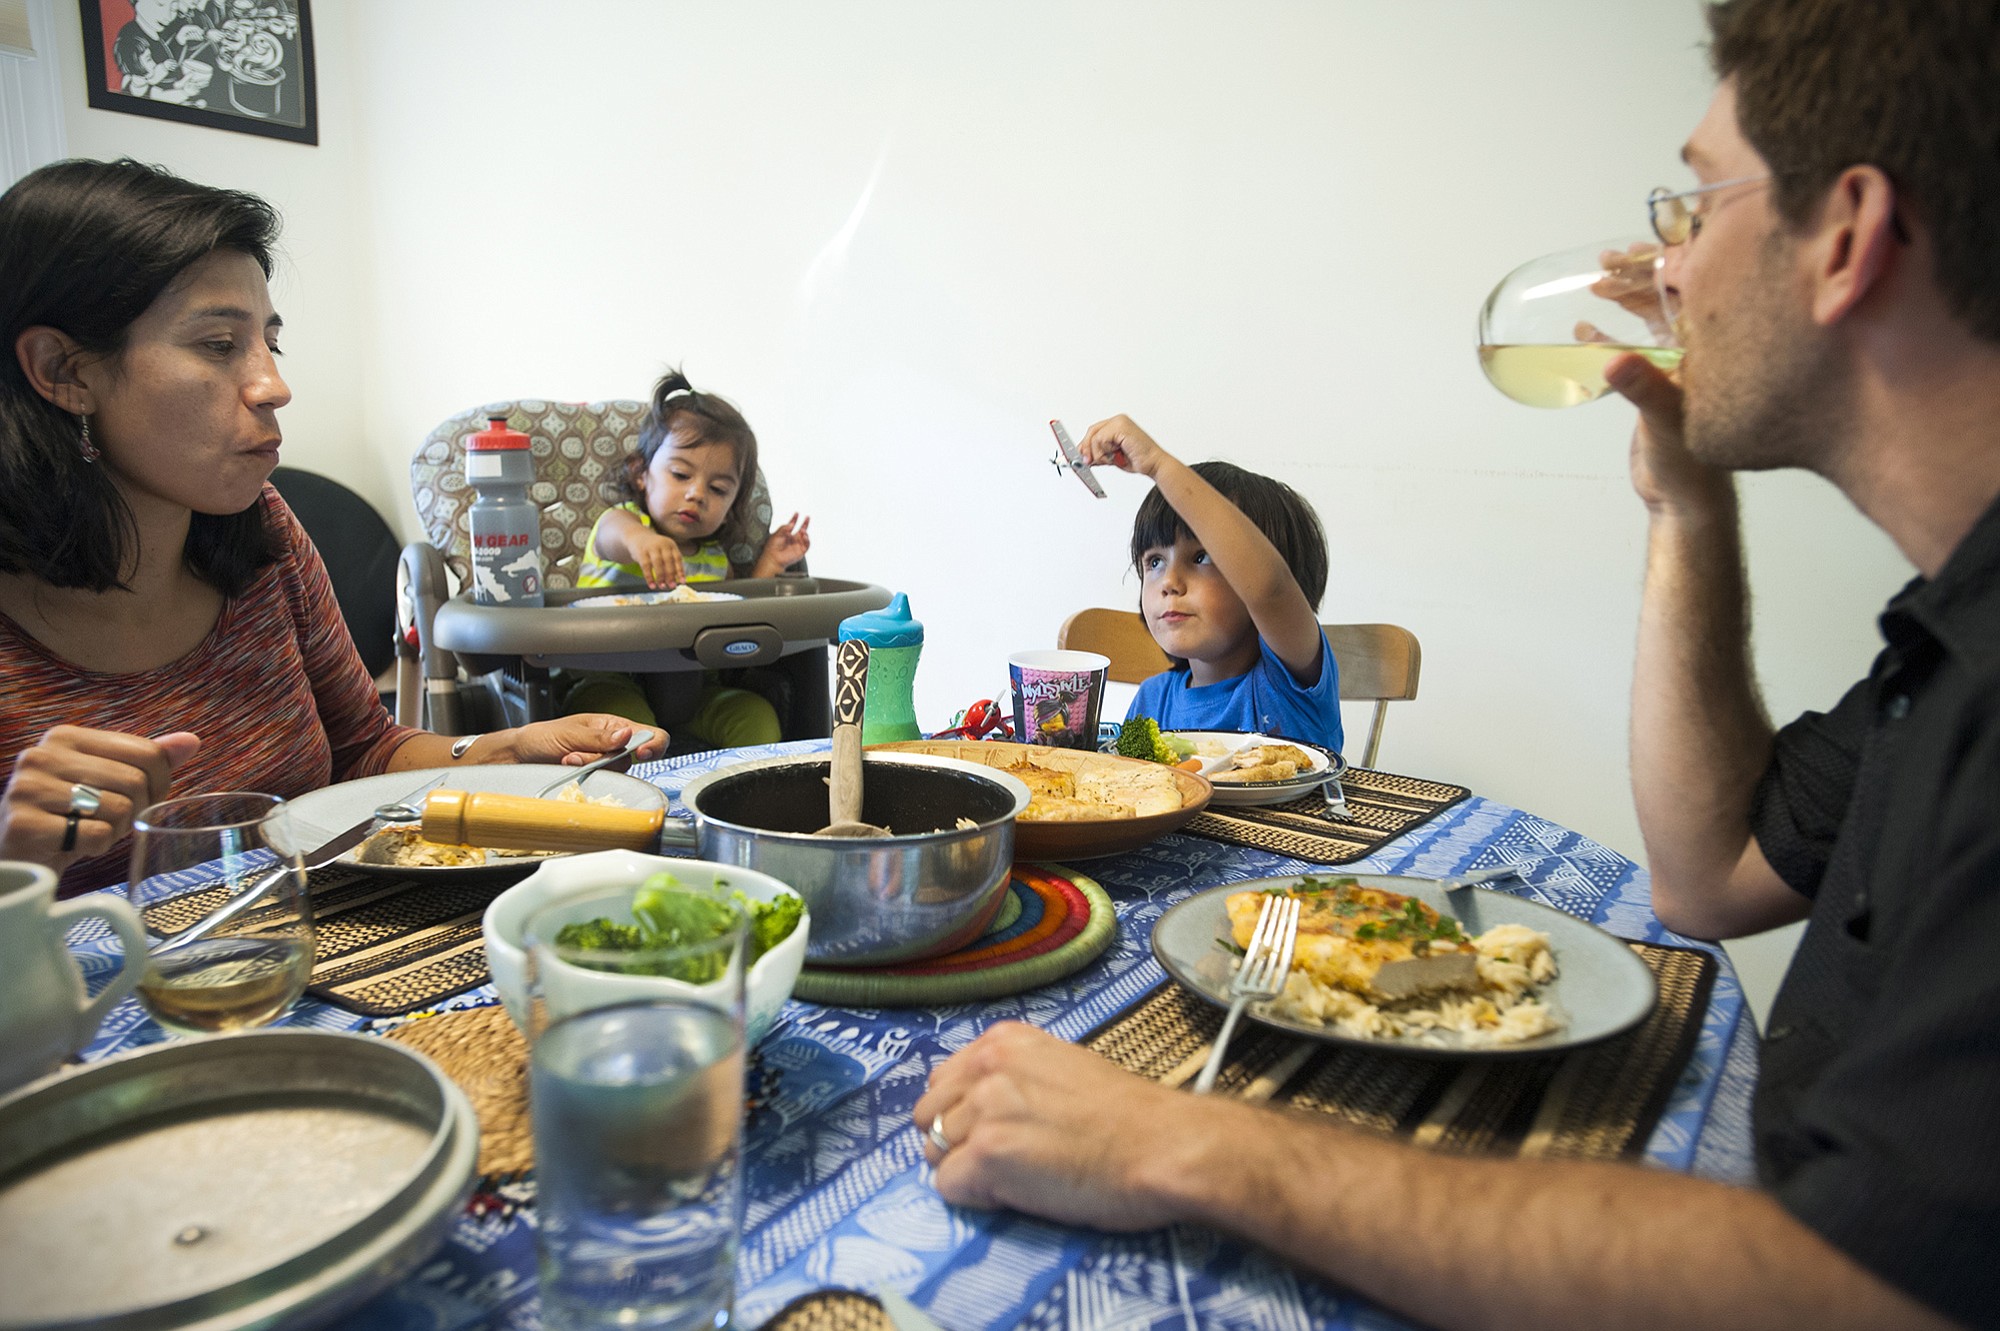 Across the United States, roughly 88 percent of Americans still say they frequently eat dinner with other members of their household, according to a study.